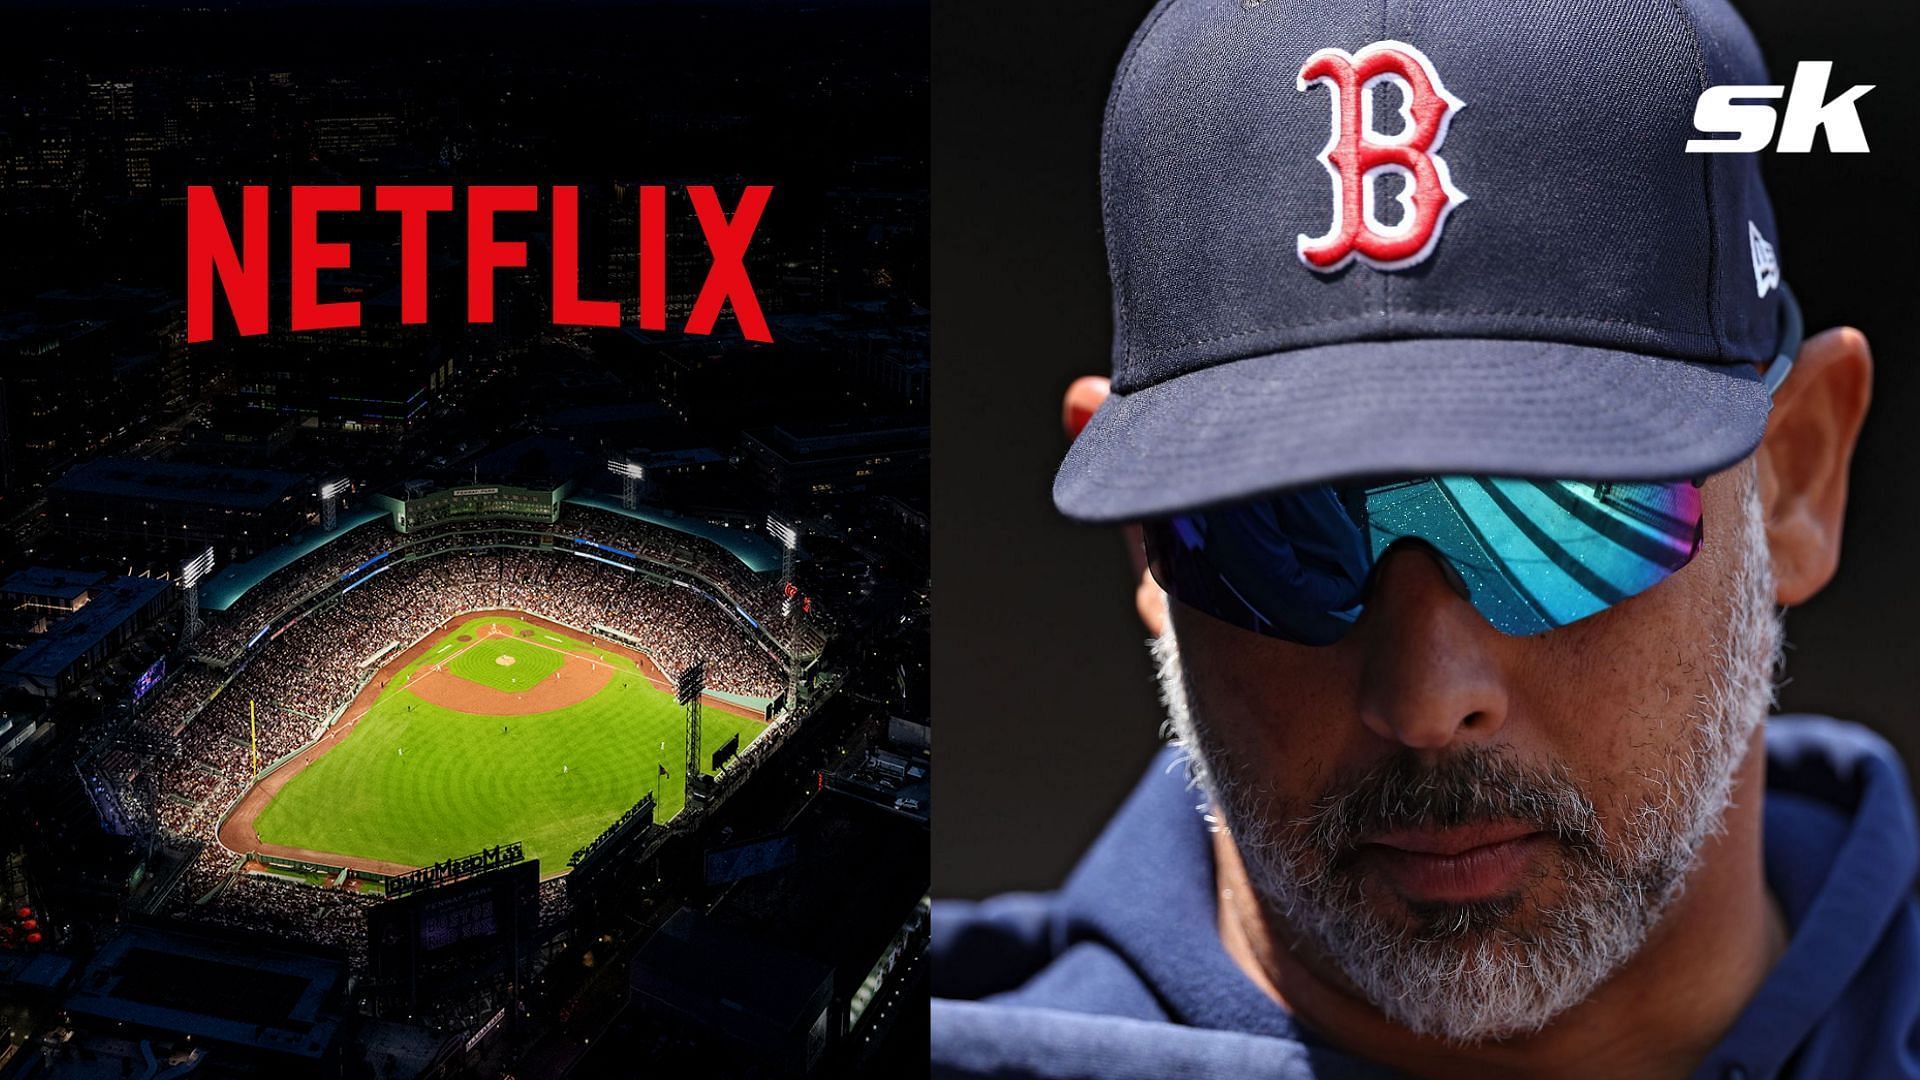 There are a number of teams that MLB fans prefer that Netflix chose for their new series over the Boston Red Sox